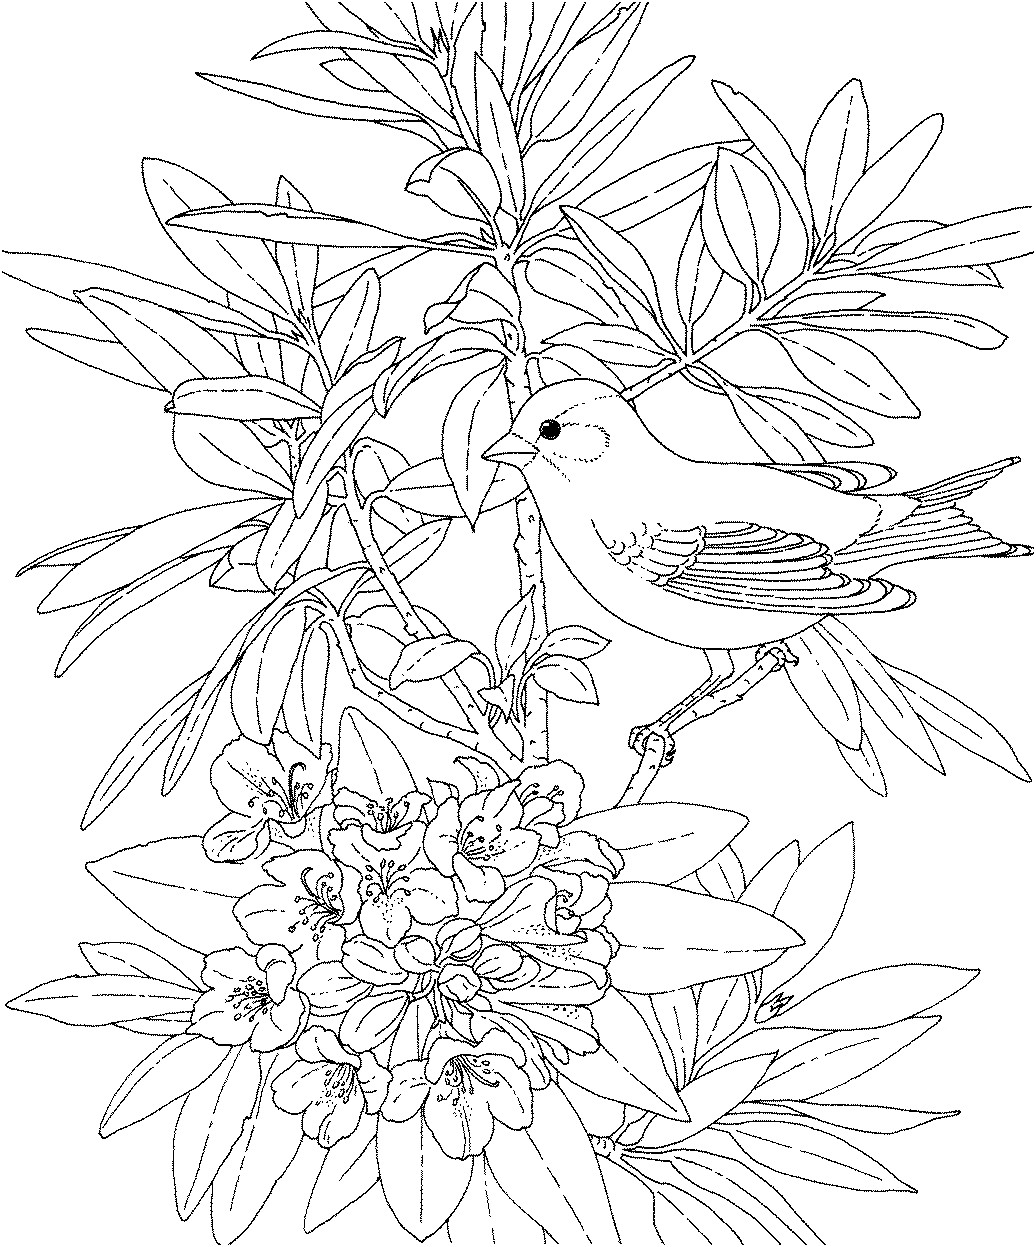 Bird Coloring Book For Adults
 His Heart of passion Little Winter Birds